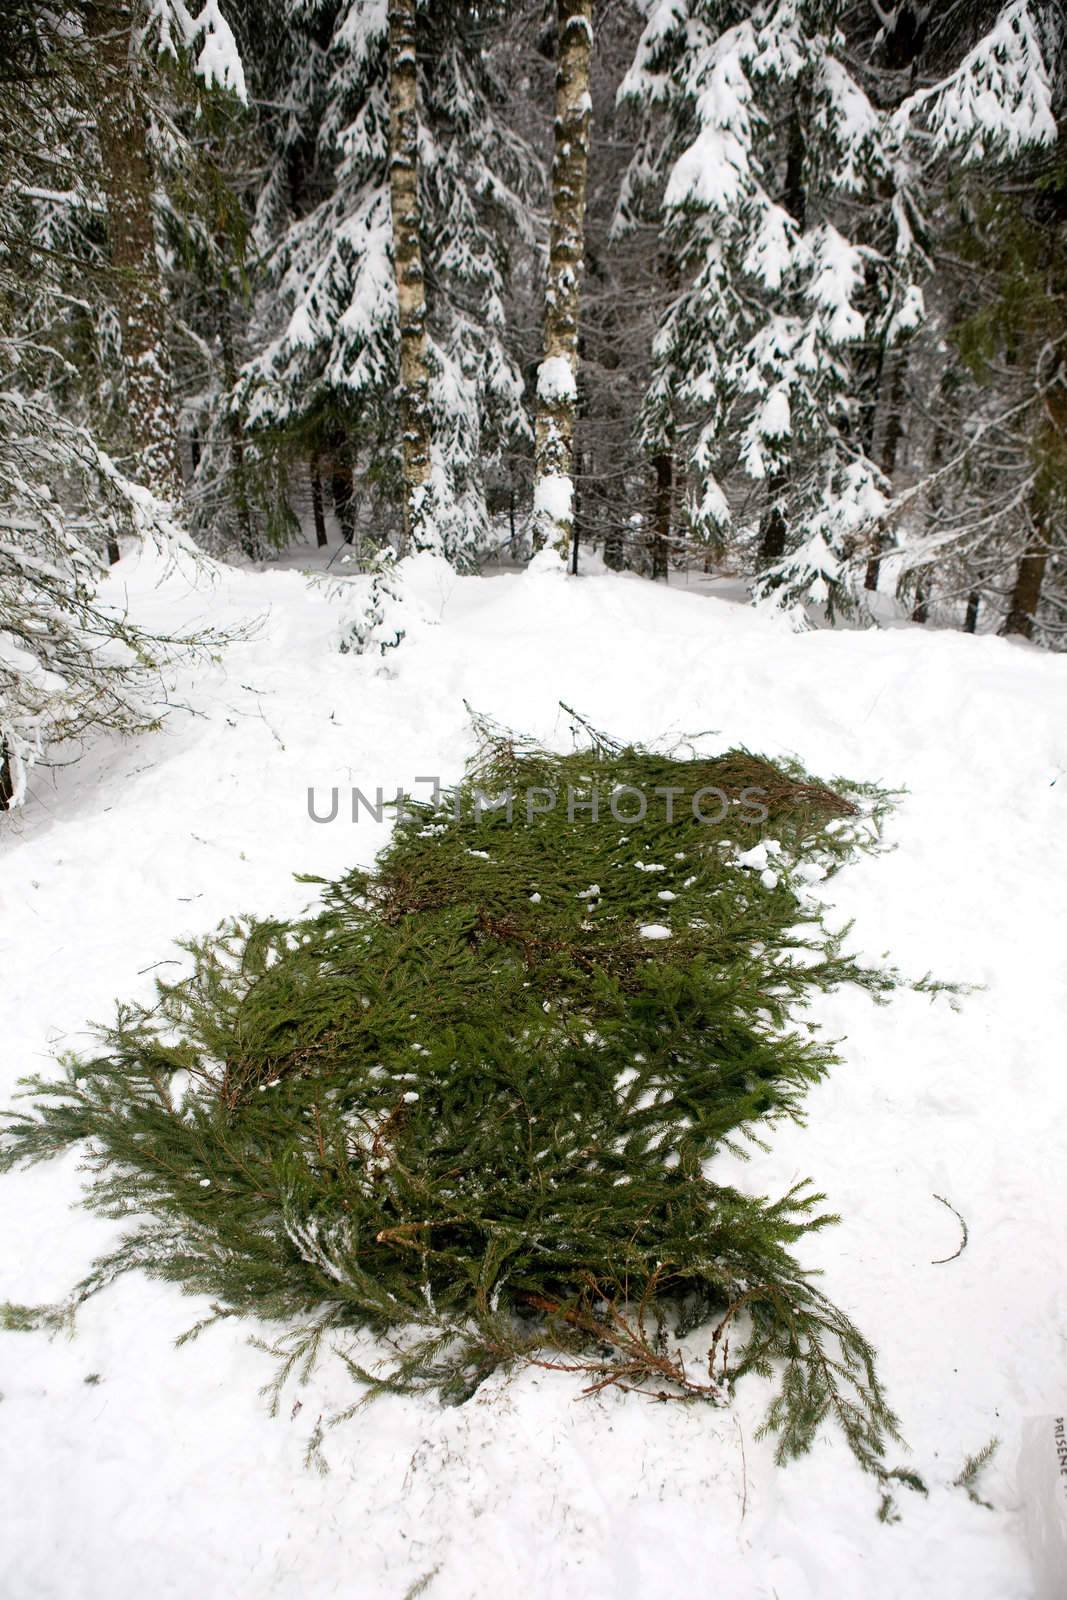 Spruce branches placed over snow to protect a tent.